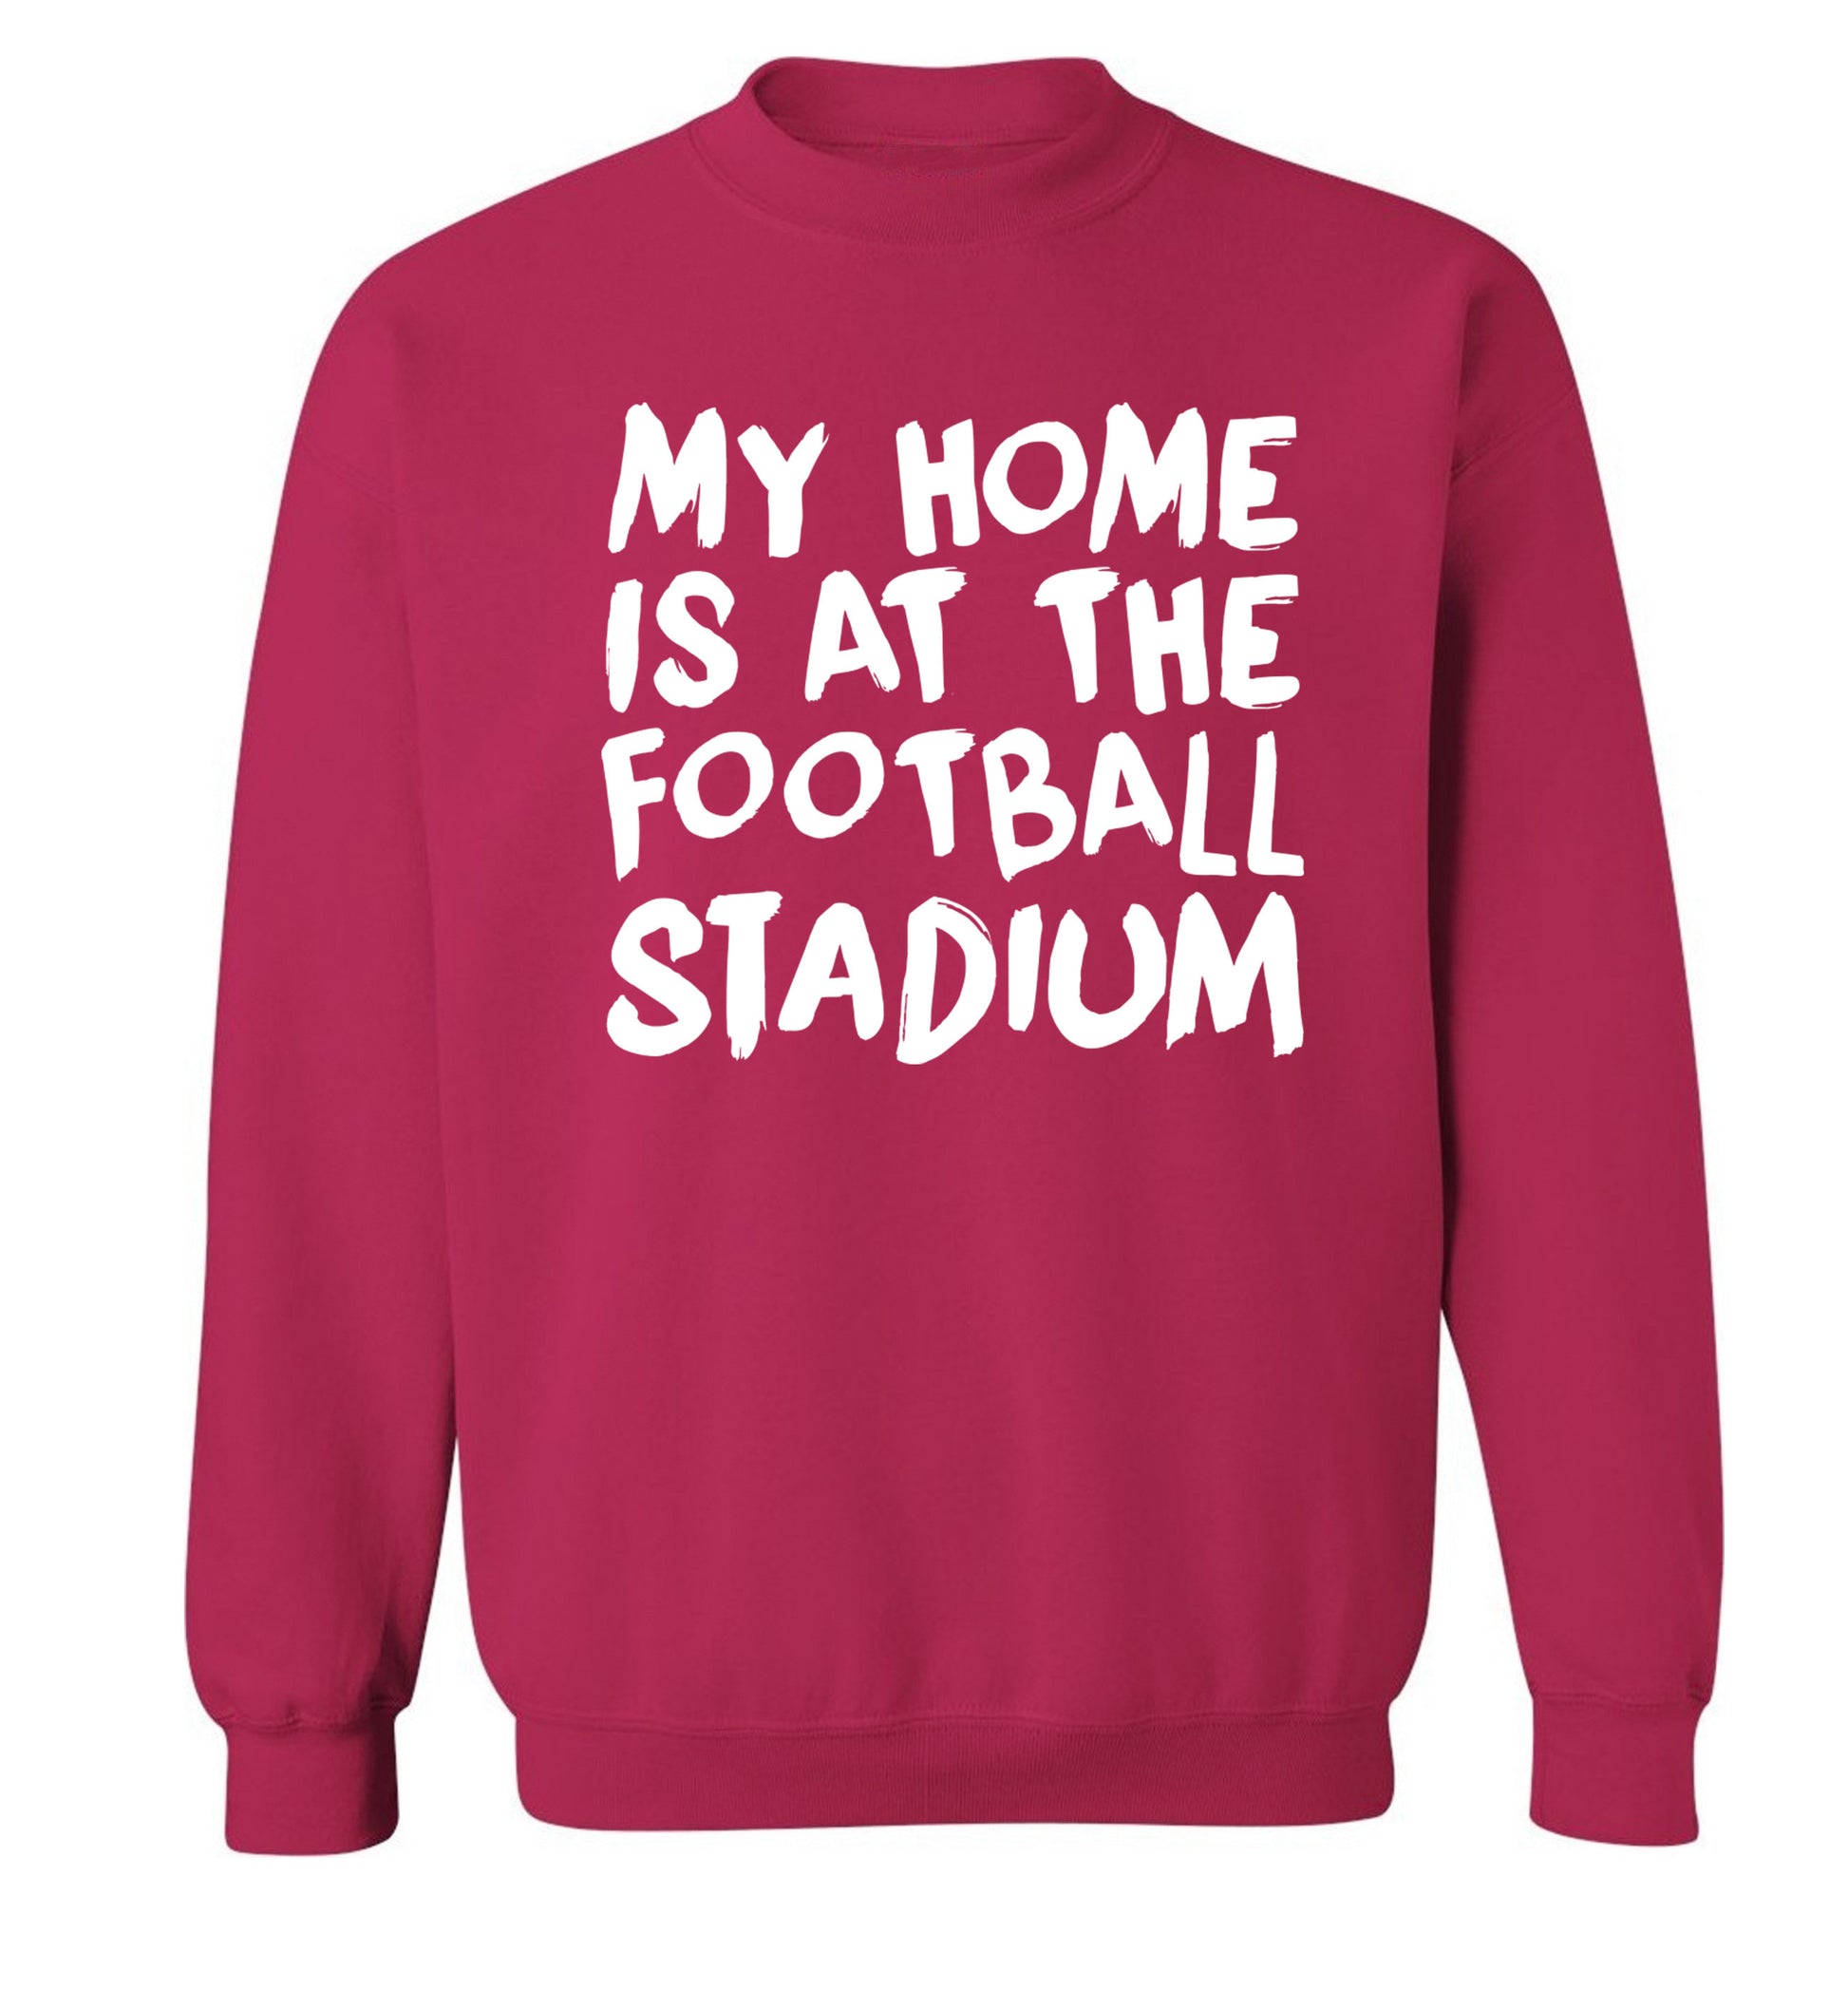 My home is at the football stadium Adult's unisex pink Sweater 2XL